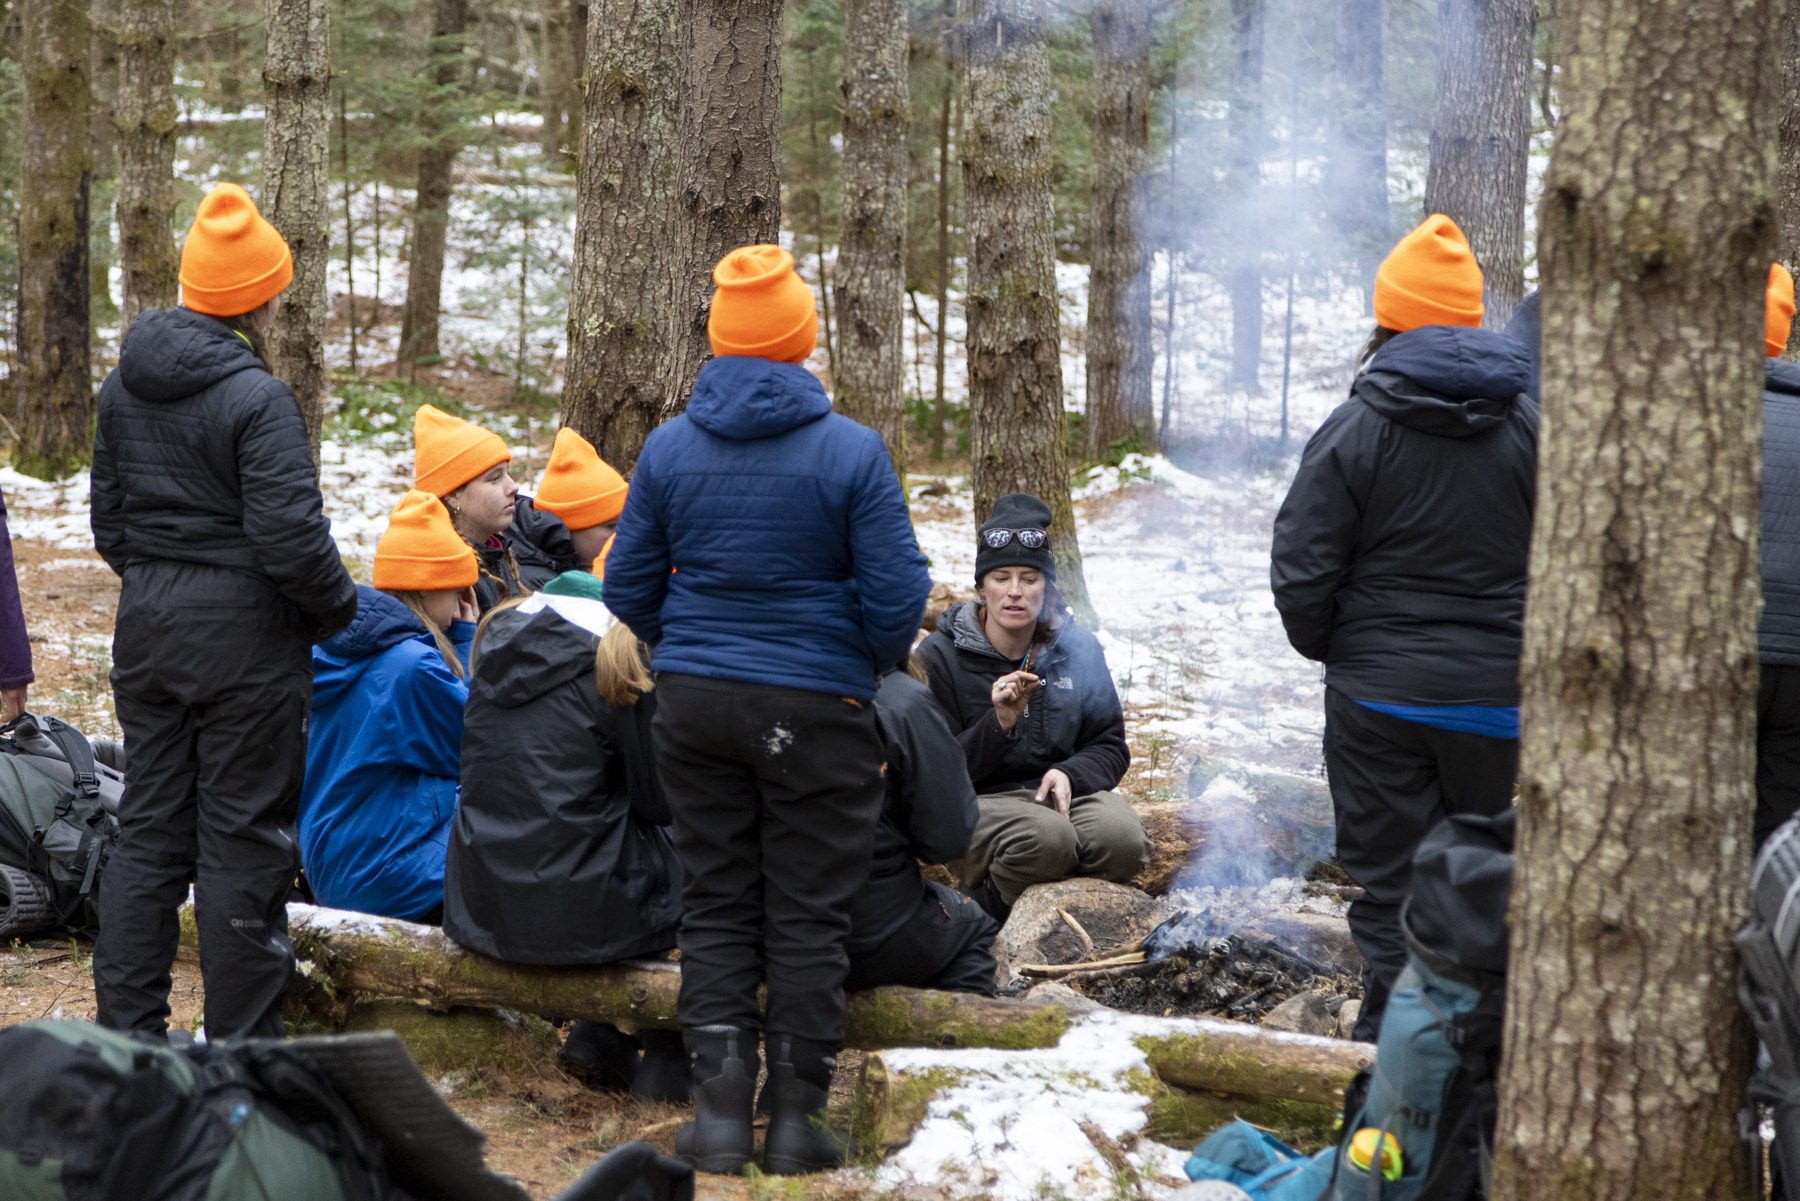 Group communication is a focus of the trip and oftens takes place around a campfire. Photo by Mike Lynch